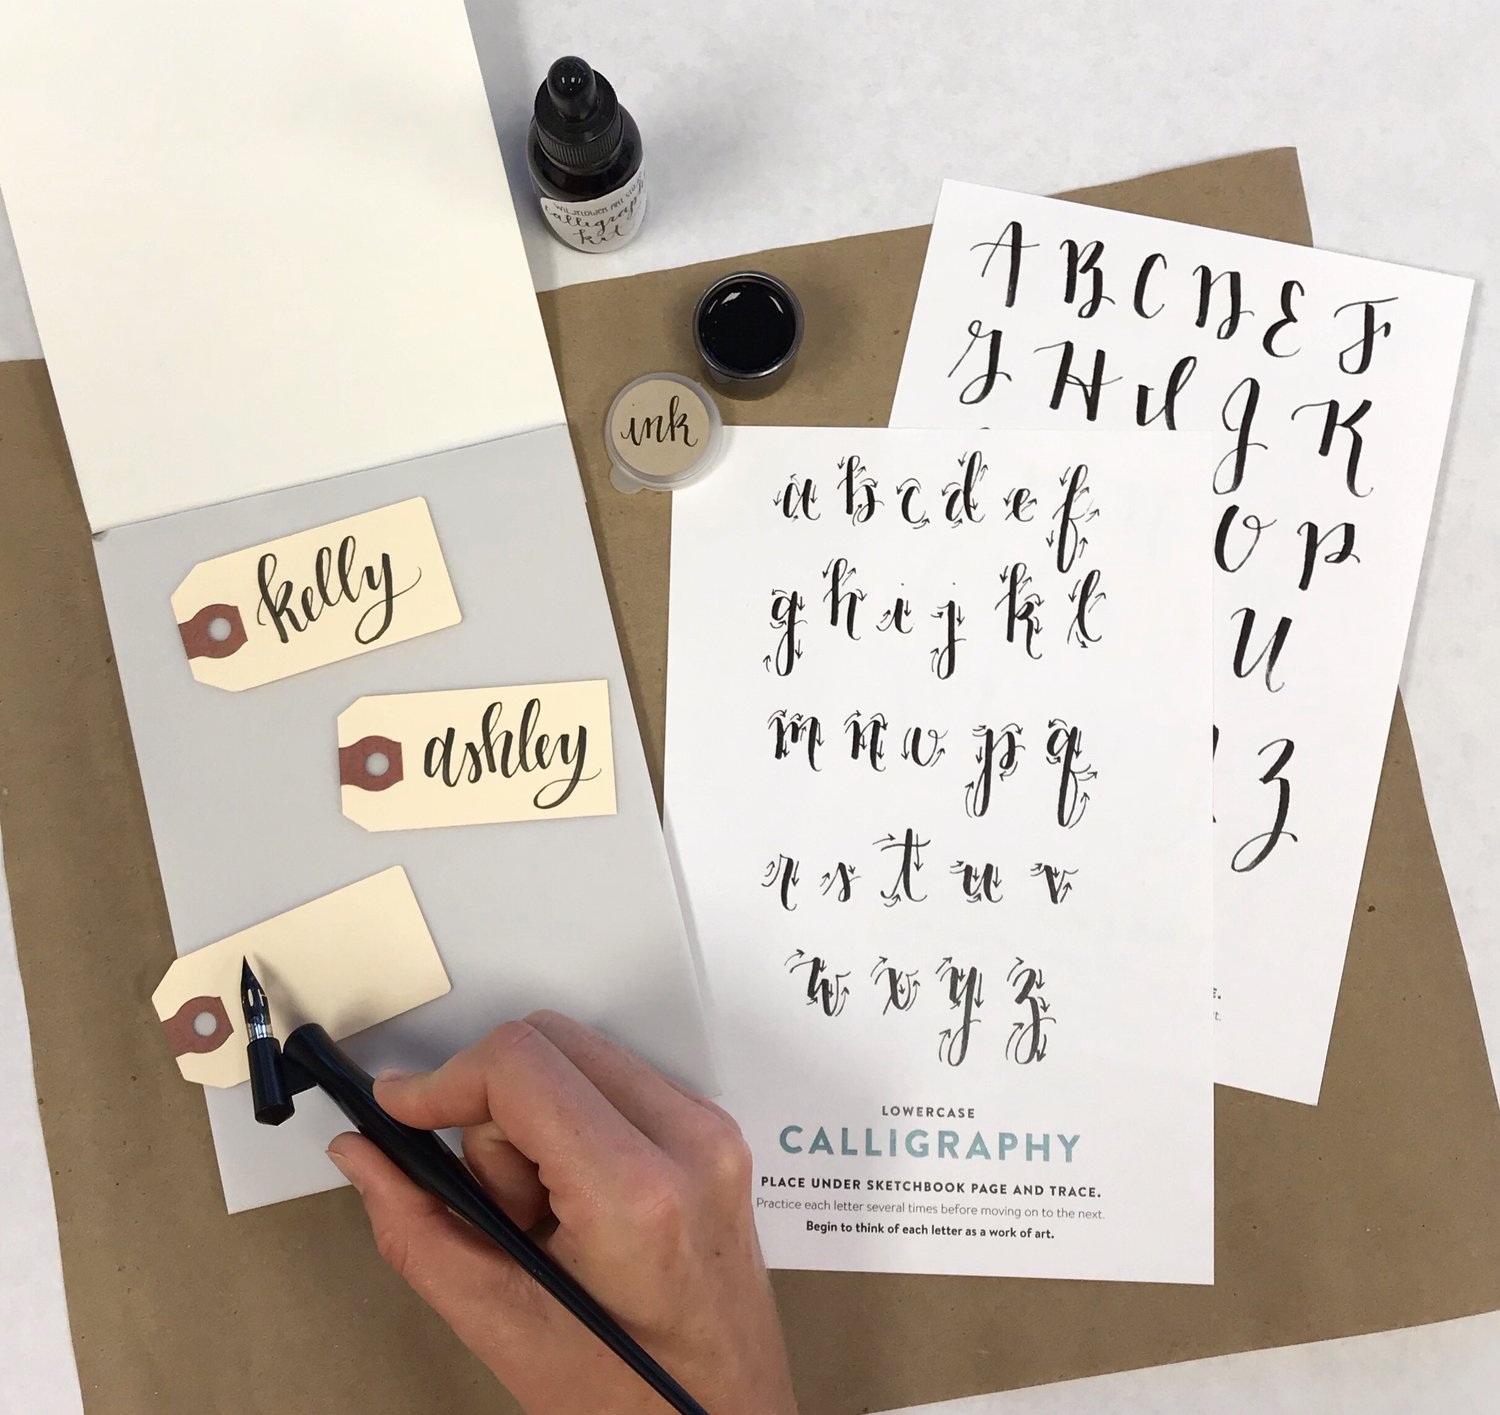 Calligraphy Kit: A complete kit for beginners